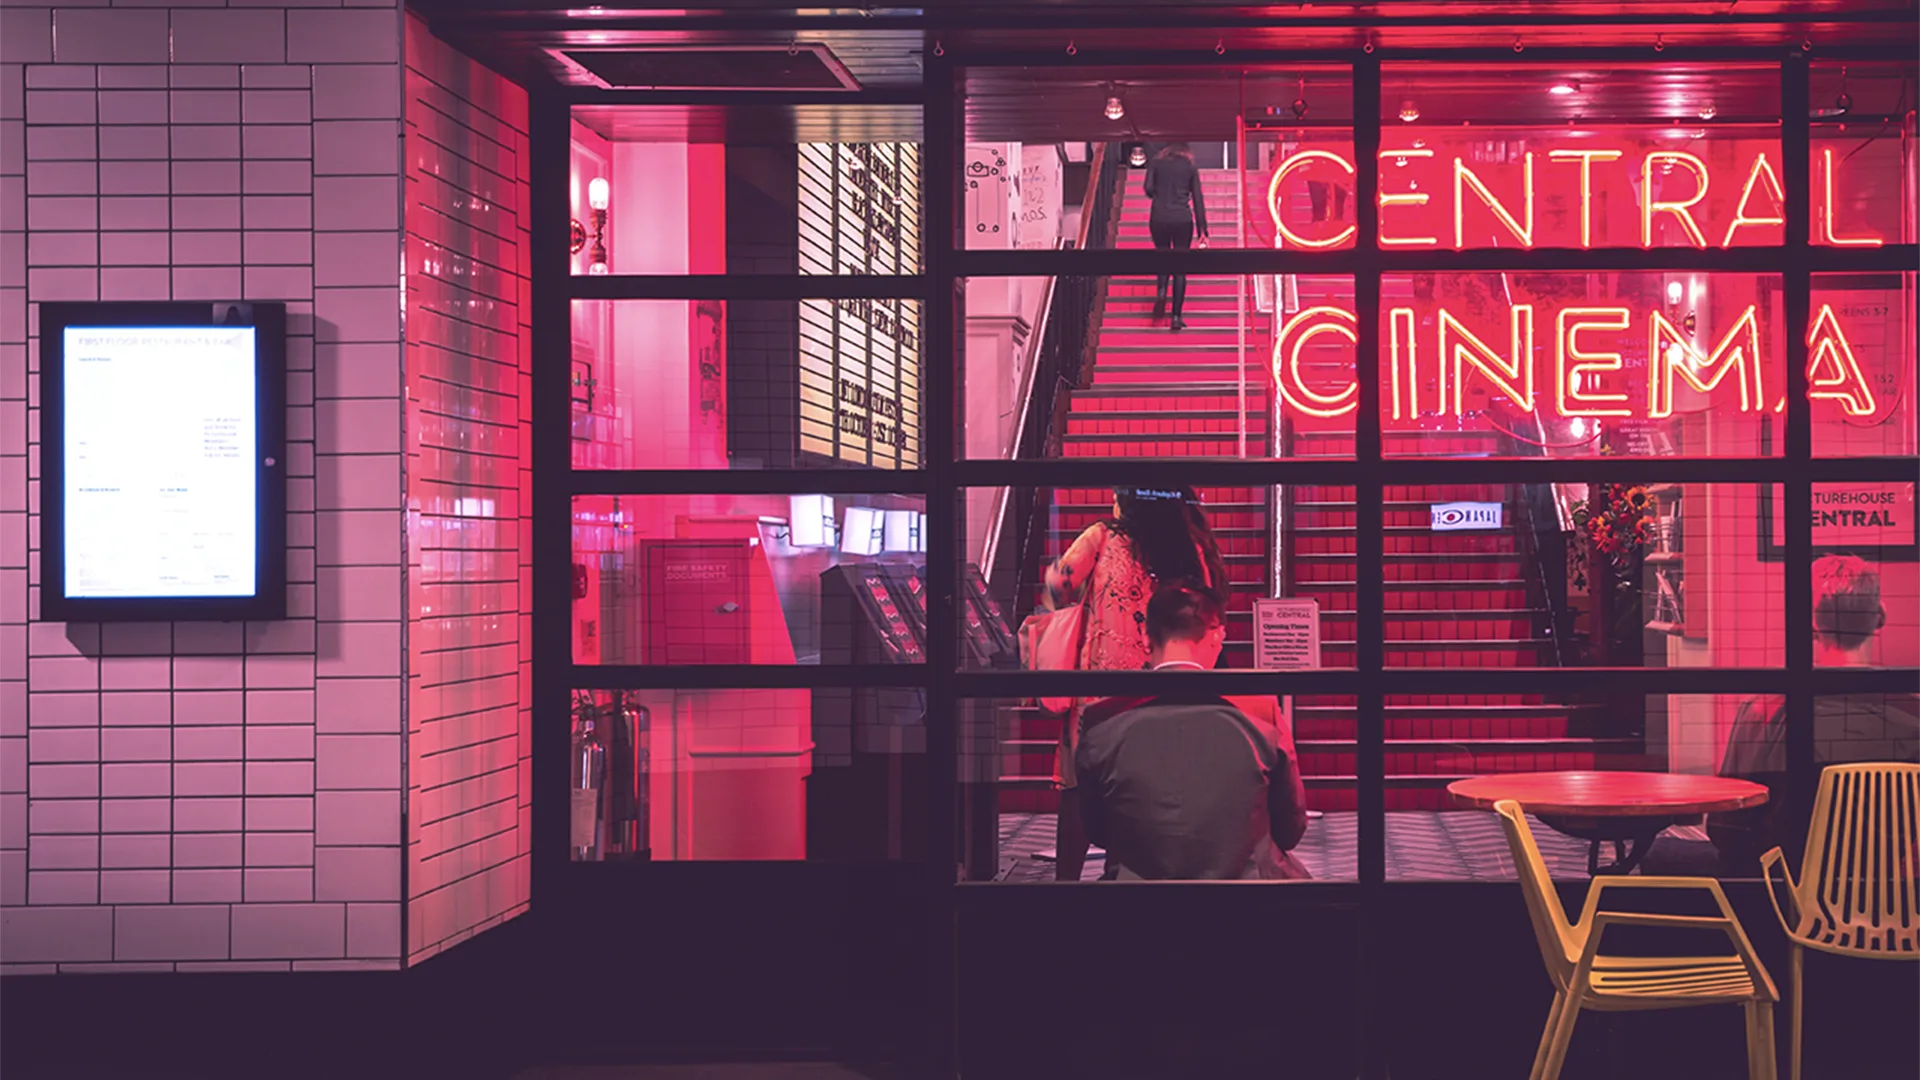 Outside view of a vintage style cinema with neon lighting